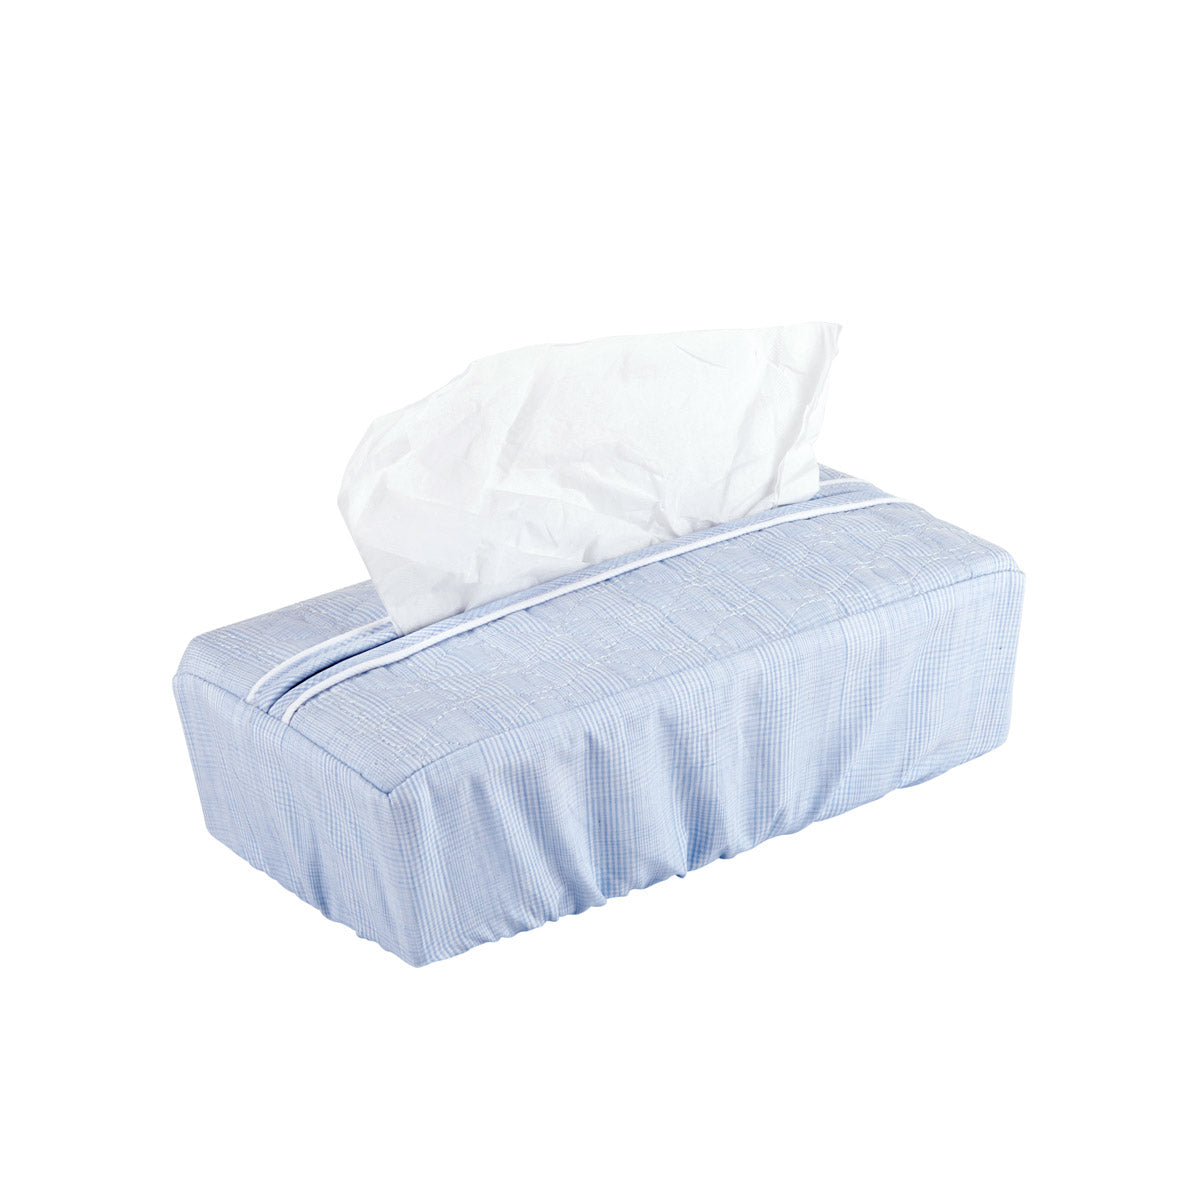 Theophile & Patachou Tissue Cover - Sweet Blue